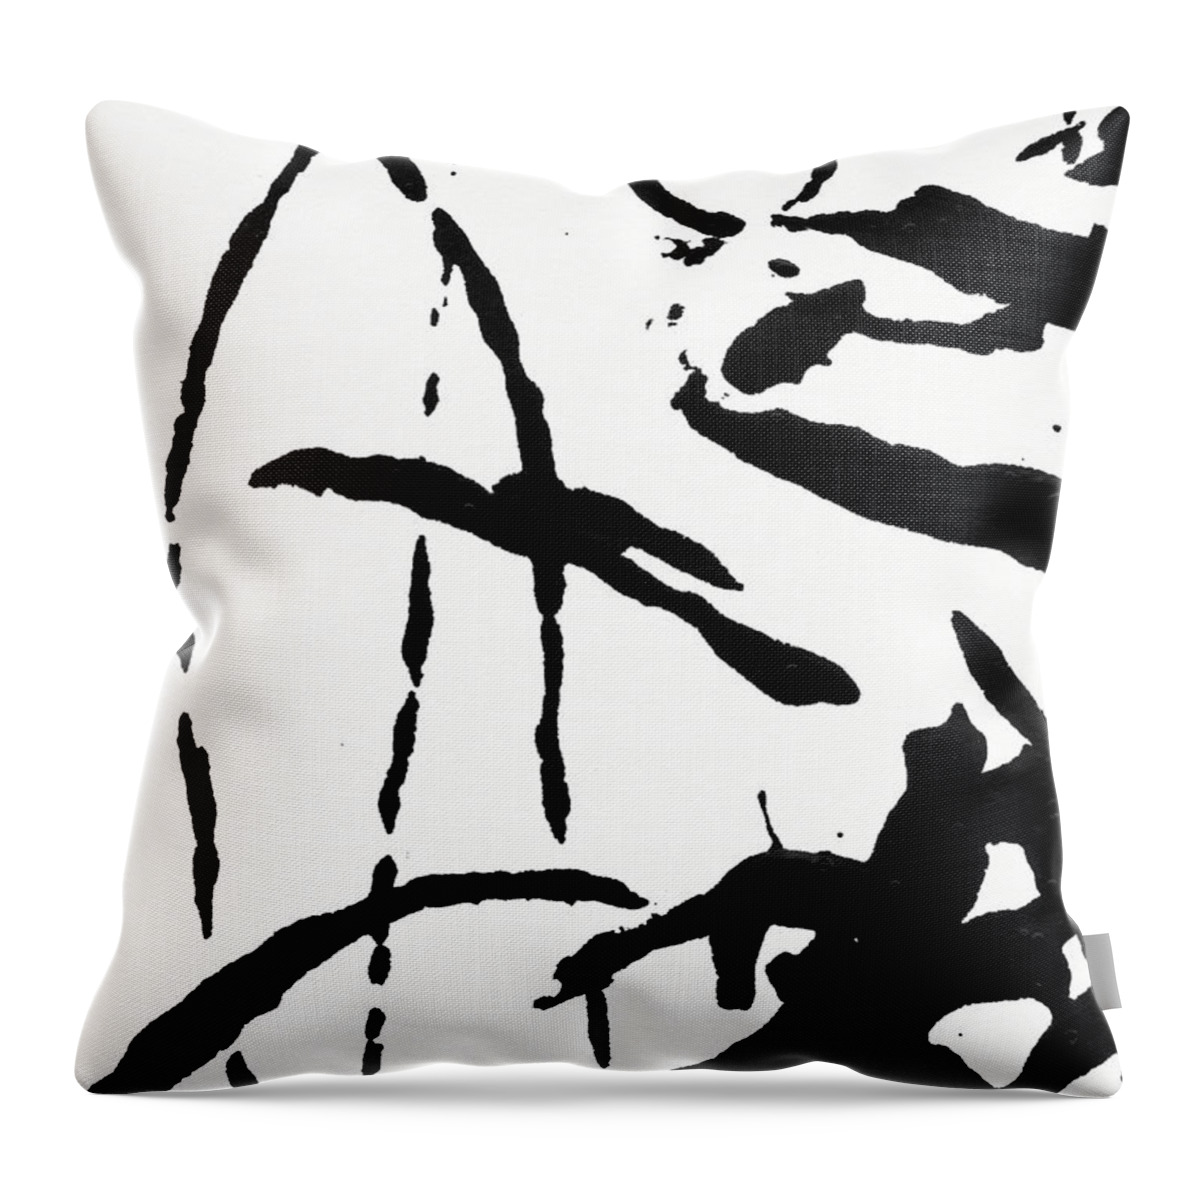 Abstract Throw Pillow featuring the painting Shadow Abstract 2- Art by Linda Woods by Linda Woods